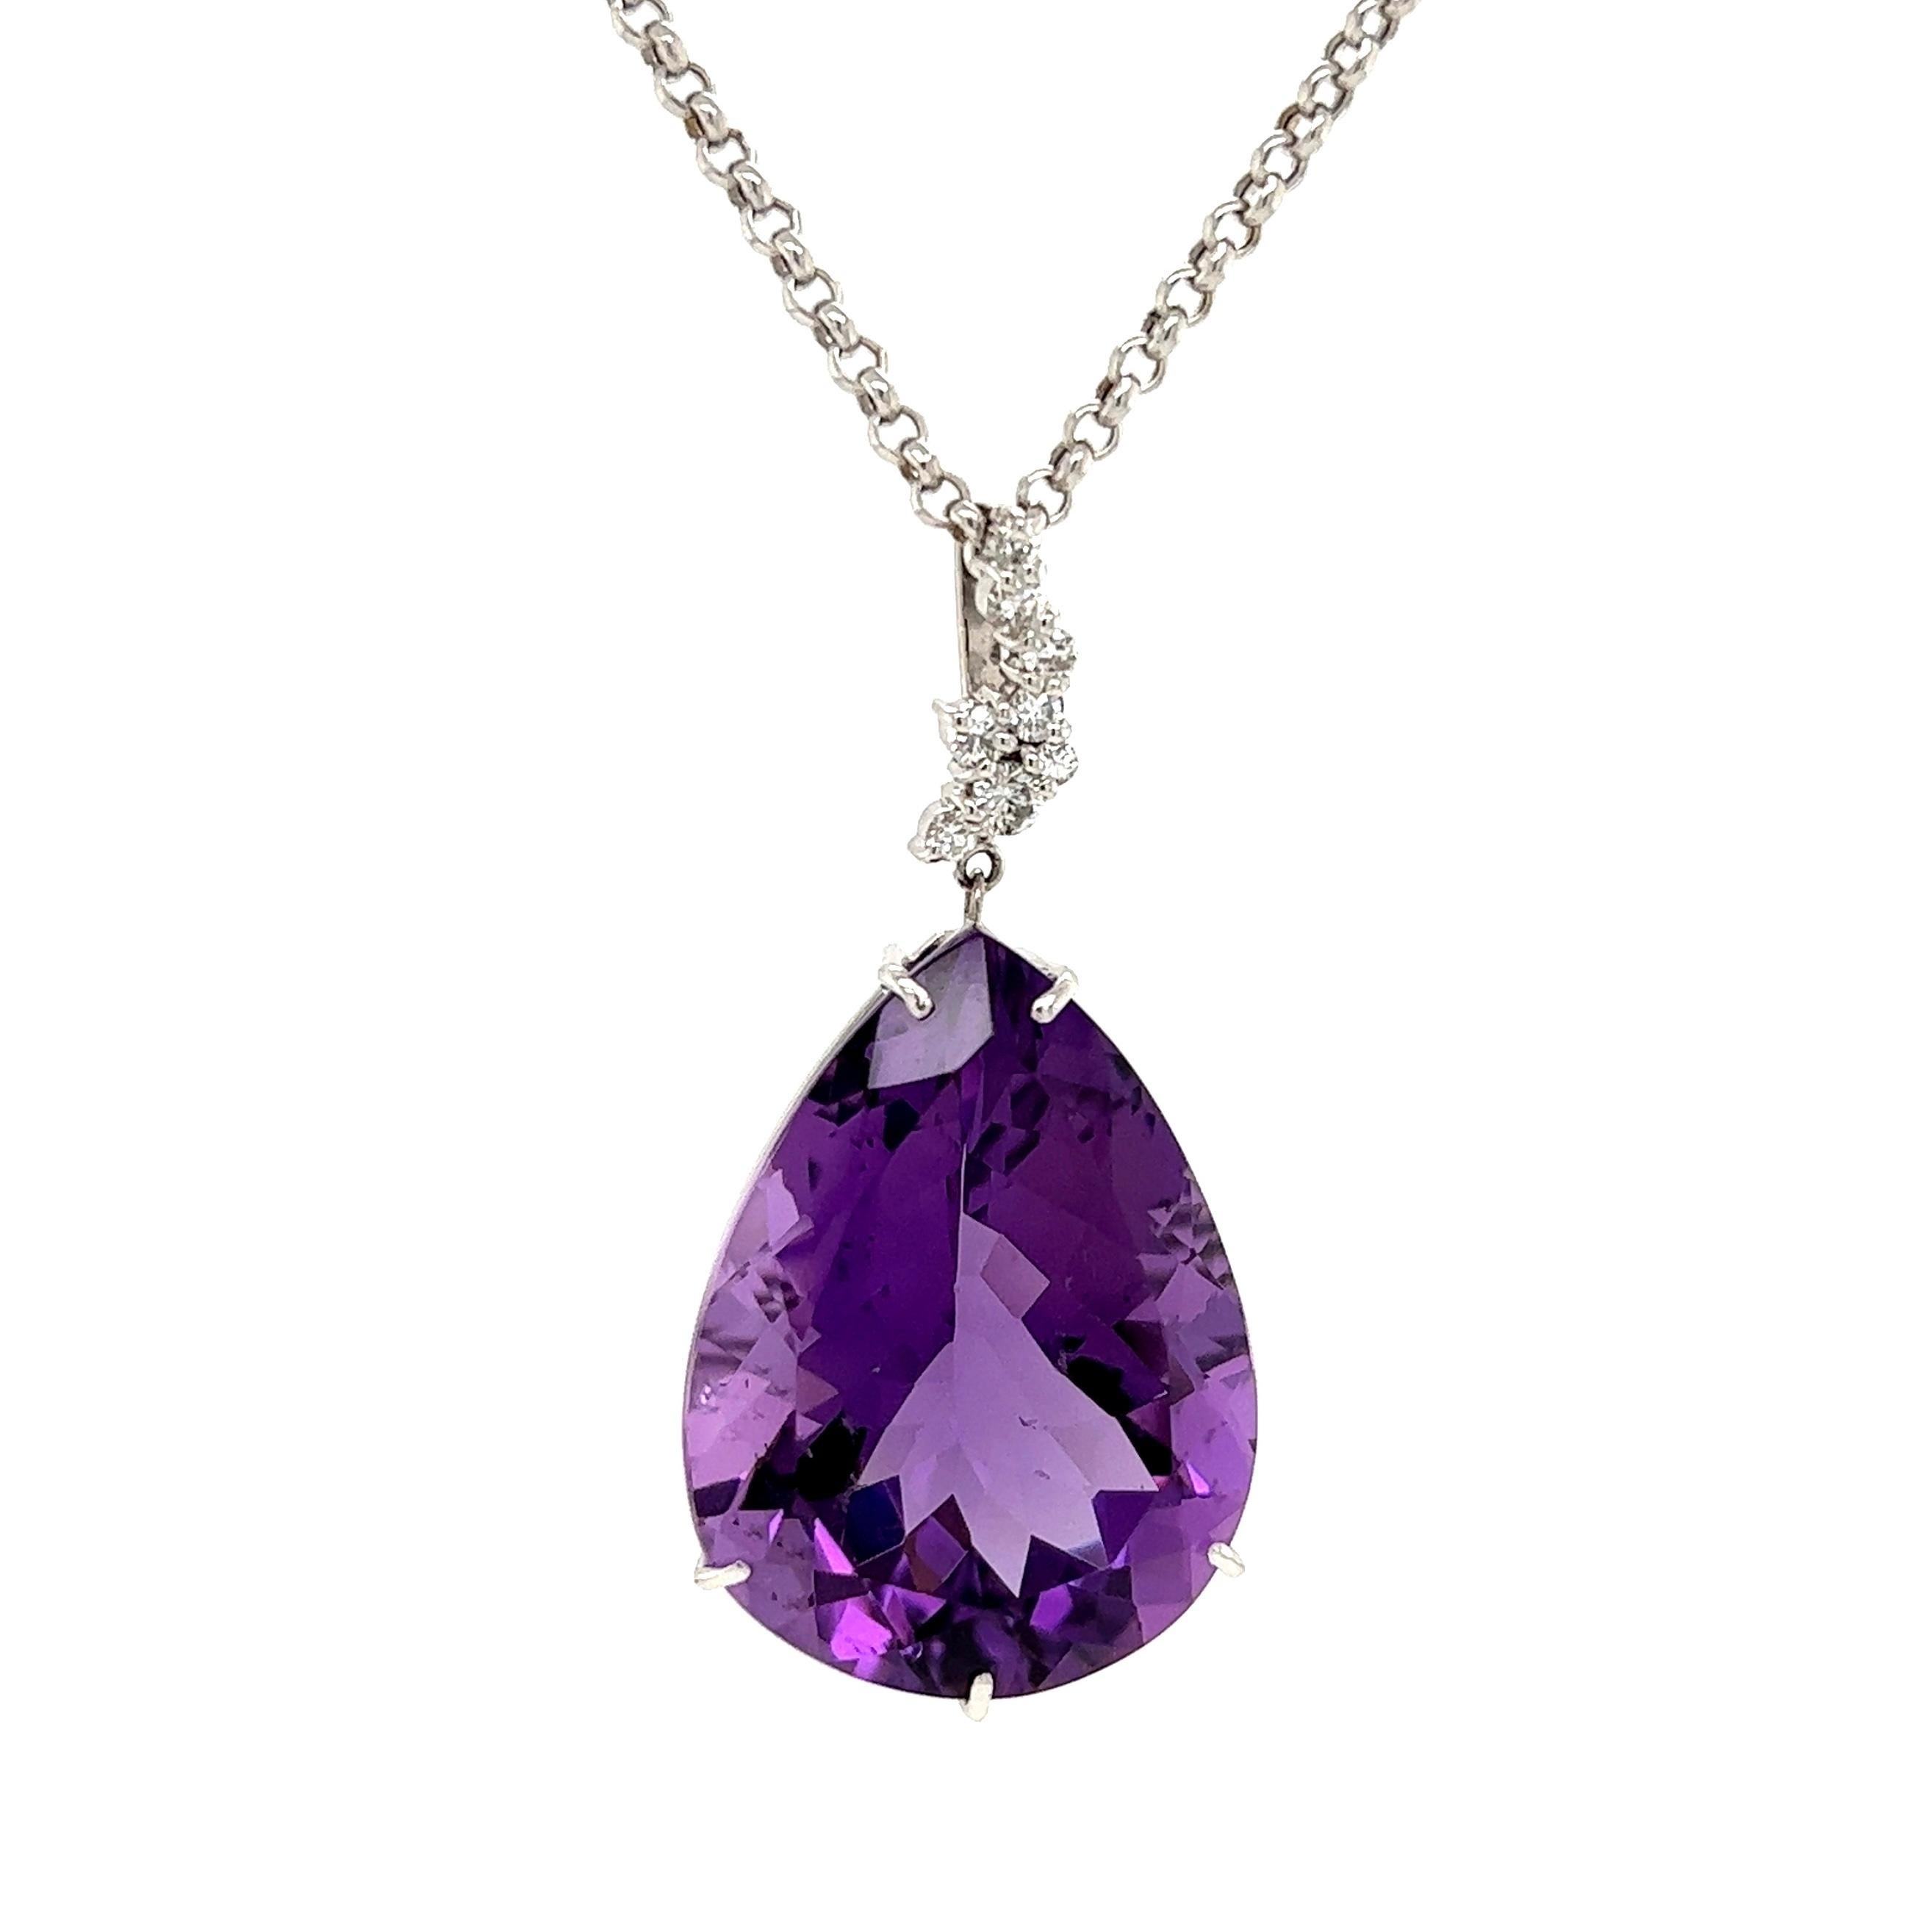 Simply Beautiful! Amethyst and Diamond Gold Drop Pendant Necklace. Center securely Hand set with a 31.63 Carat Pear Shape Amethyst, surrounded by Diamonds approx. 0.23tcw. Suspended from a Gold Link Chain, approx. 18” long. Pendant dimensions: 1.60”